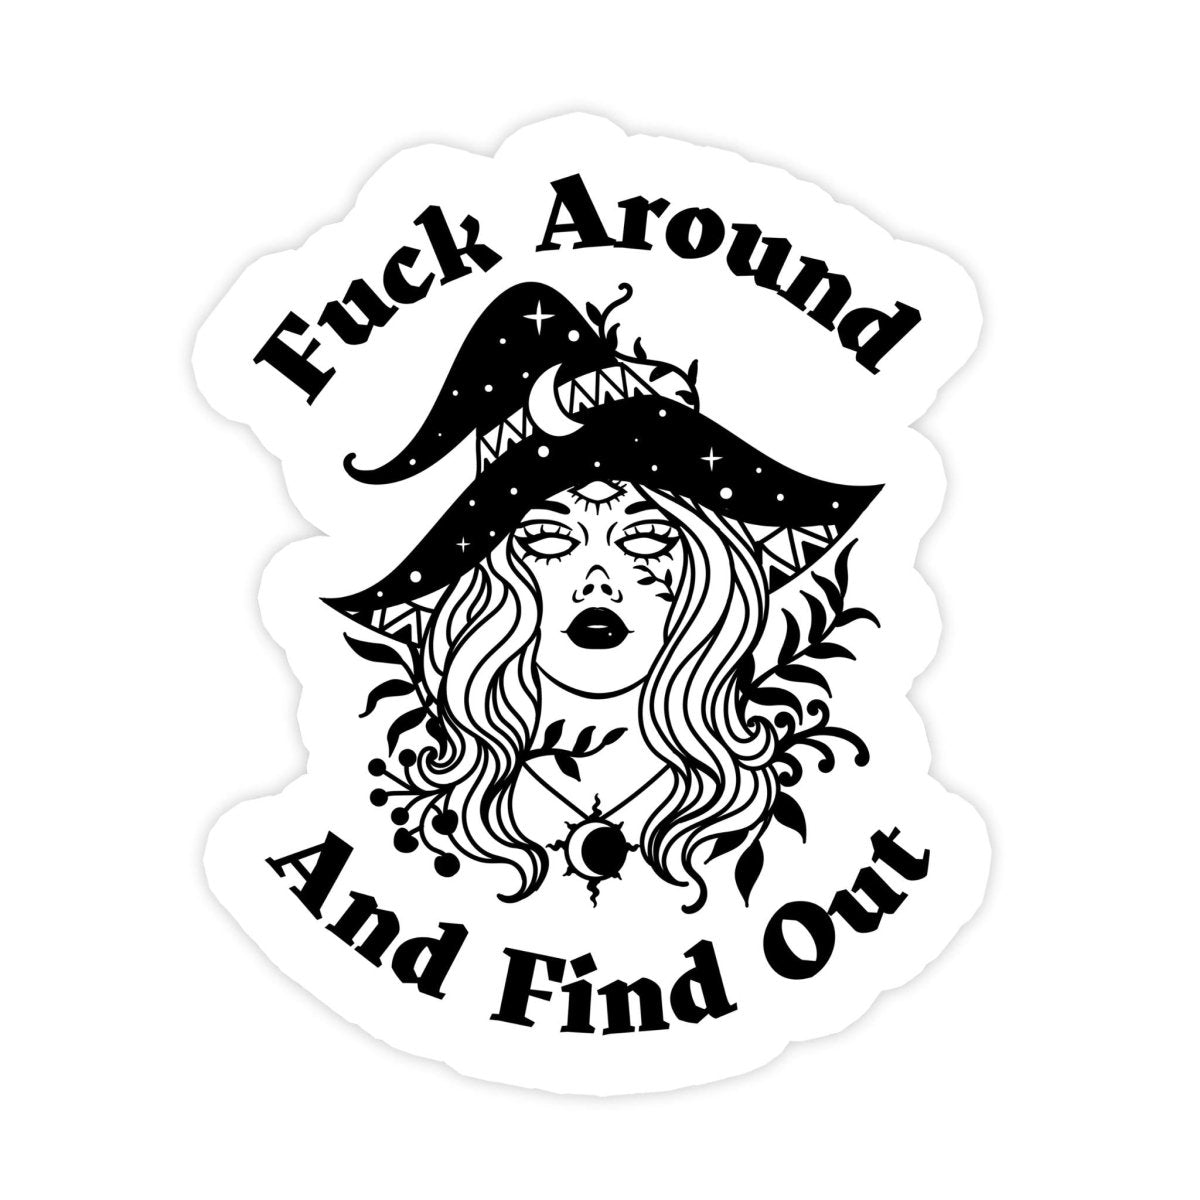 Fuck Around And Find Out Witch Sticker - stickerbullFuck Around And Find Out Witch StickerRetail StickerstickerbullstickerbullSammy_WitchFindOut [#291]Fuck Around And Find Out Witch Sticker